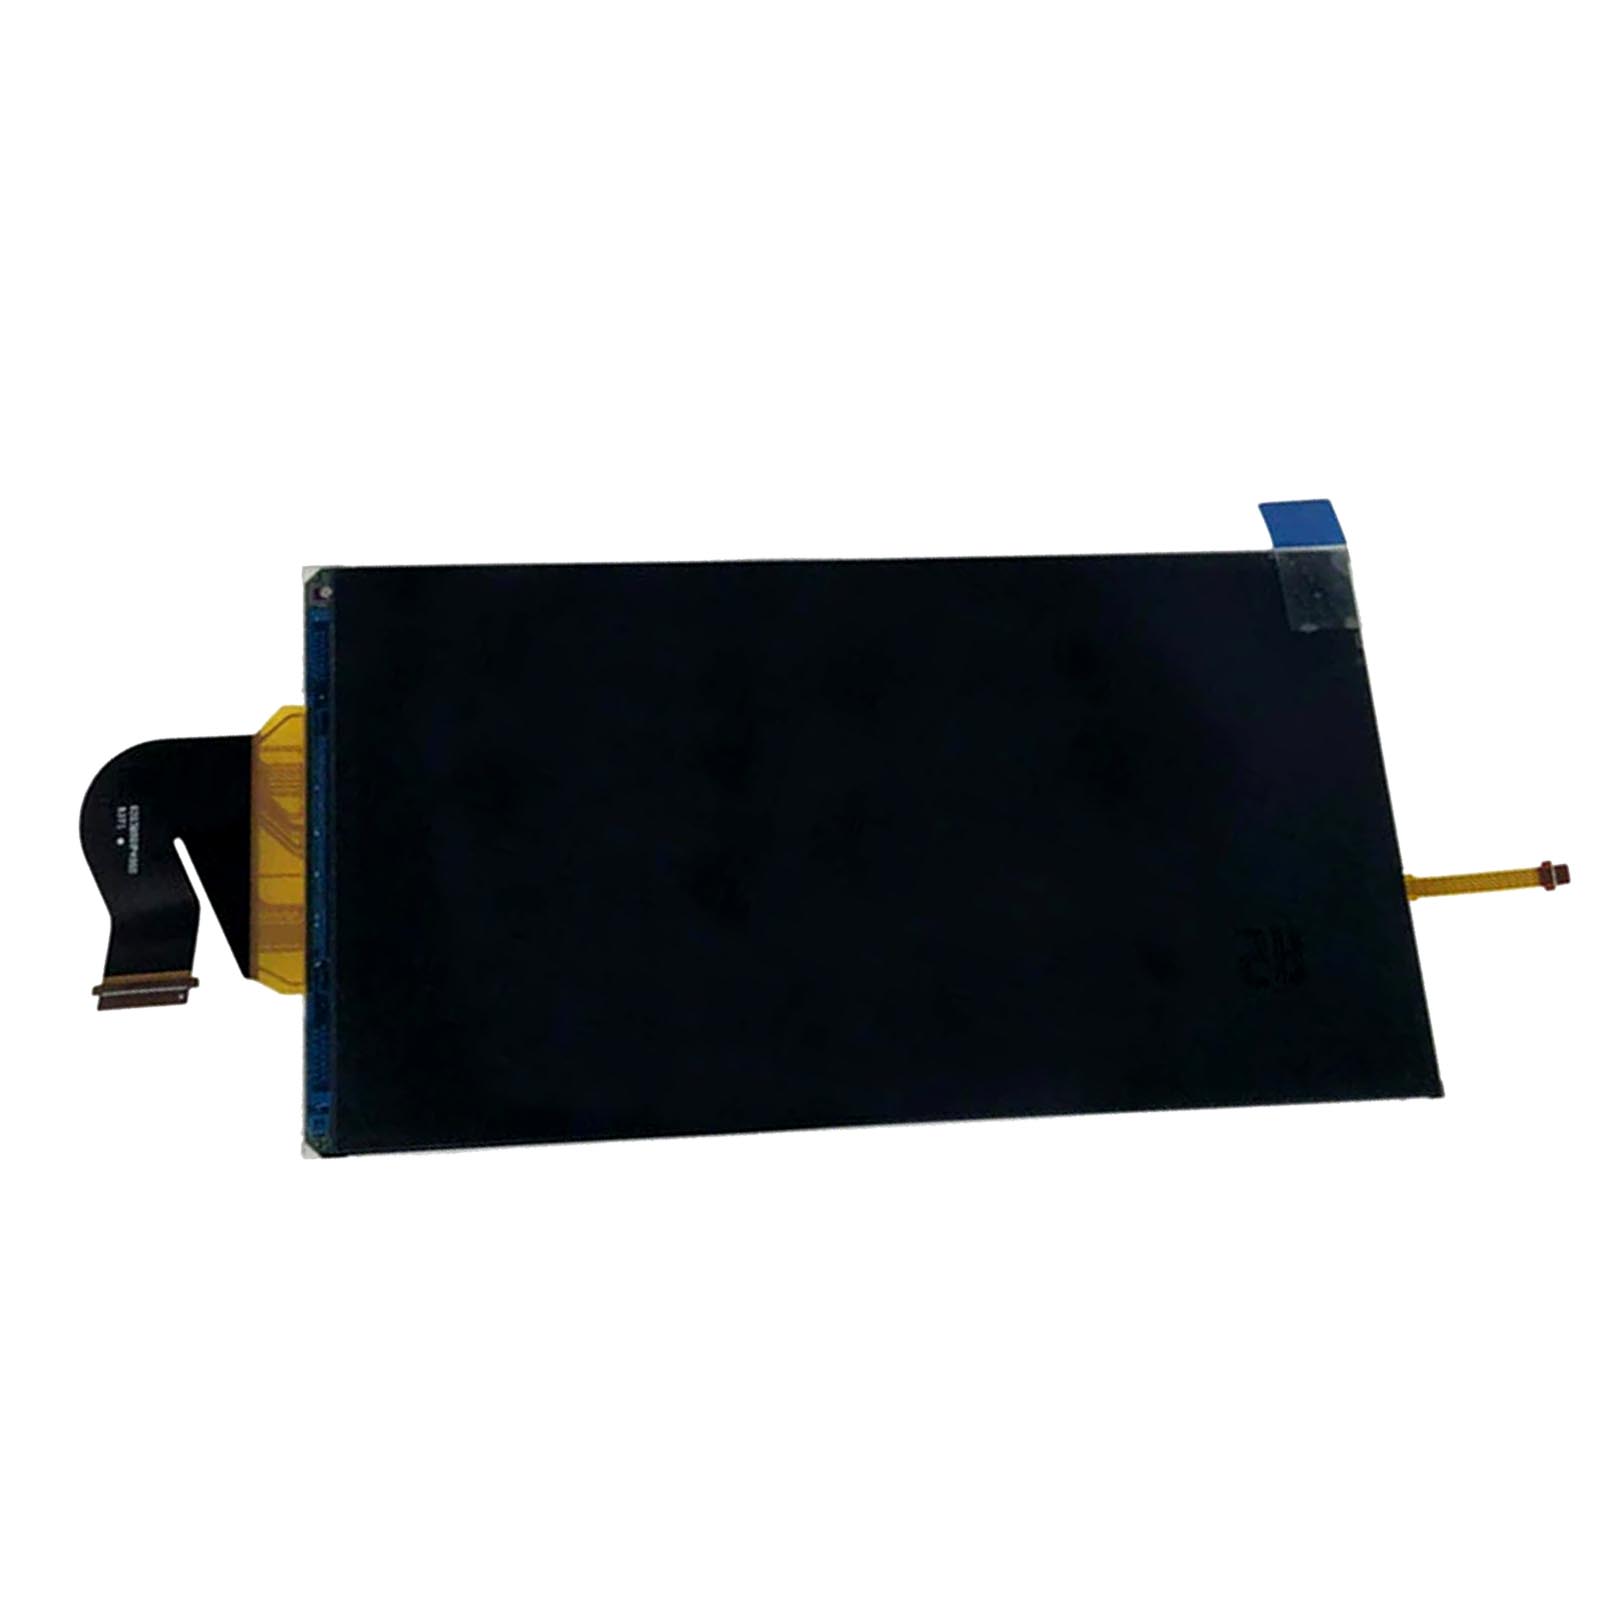 Nintendo Switch Lite Replacement LCD Display Screen for Switch Lite